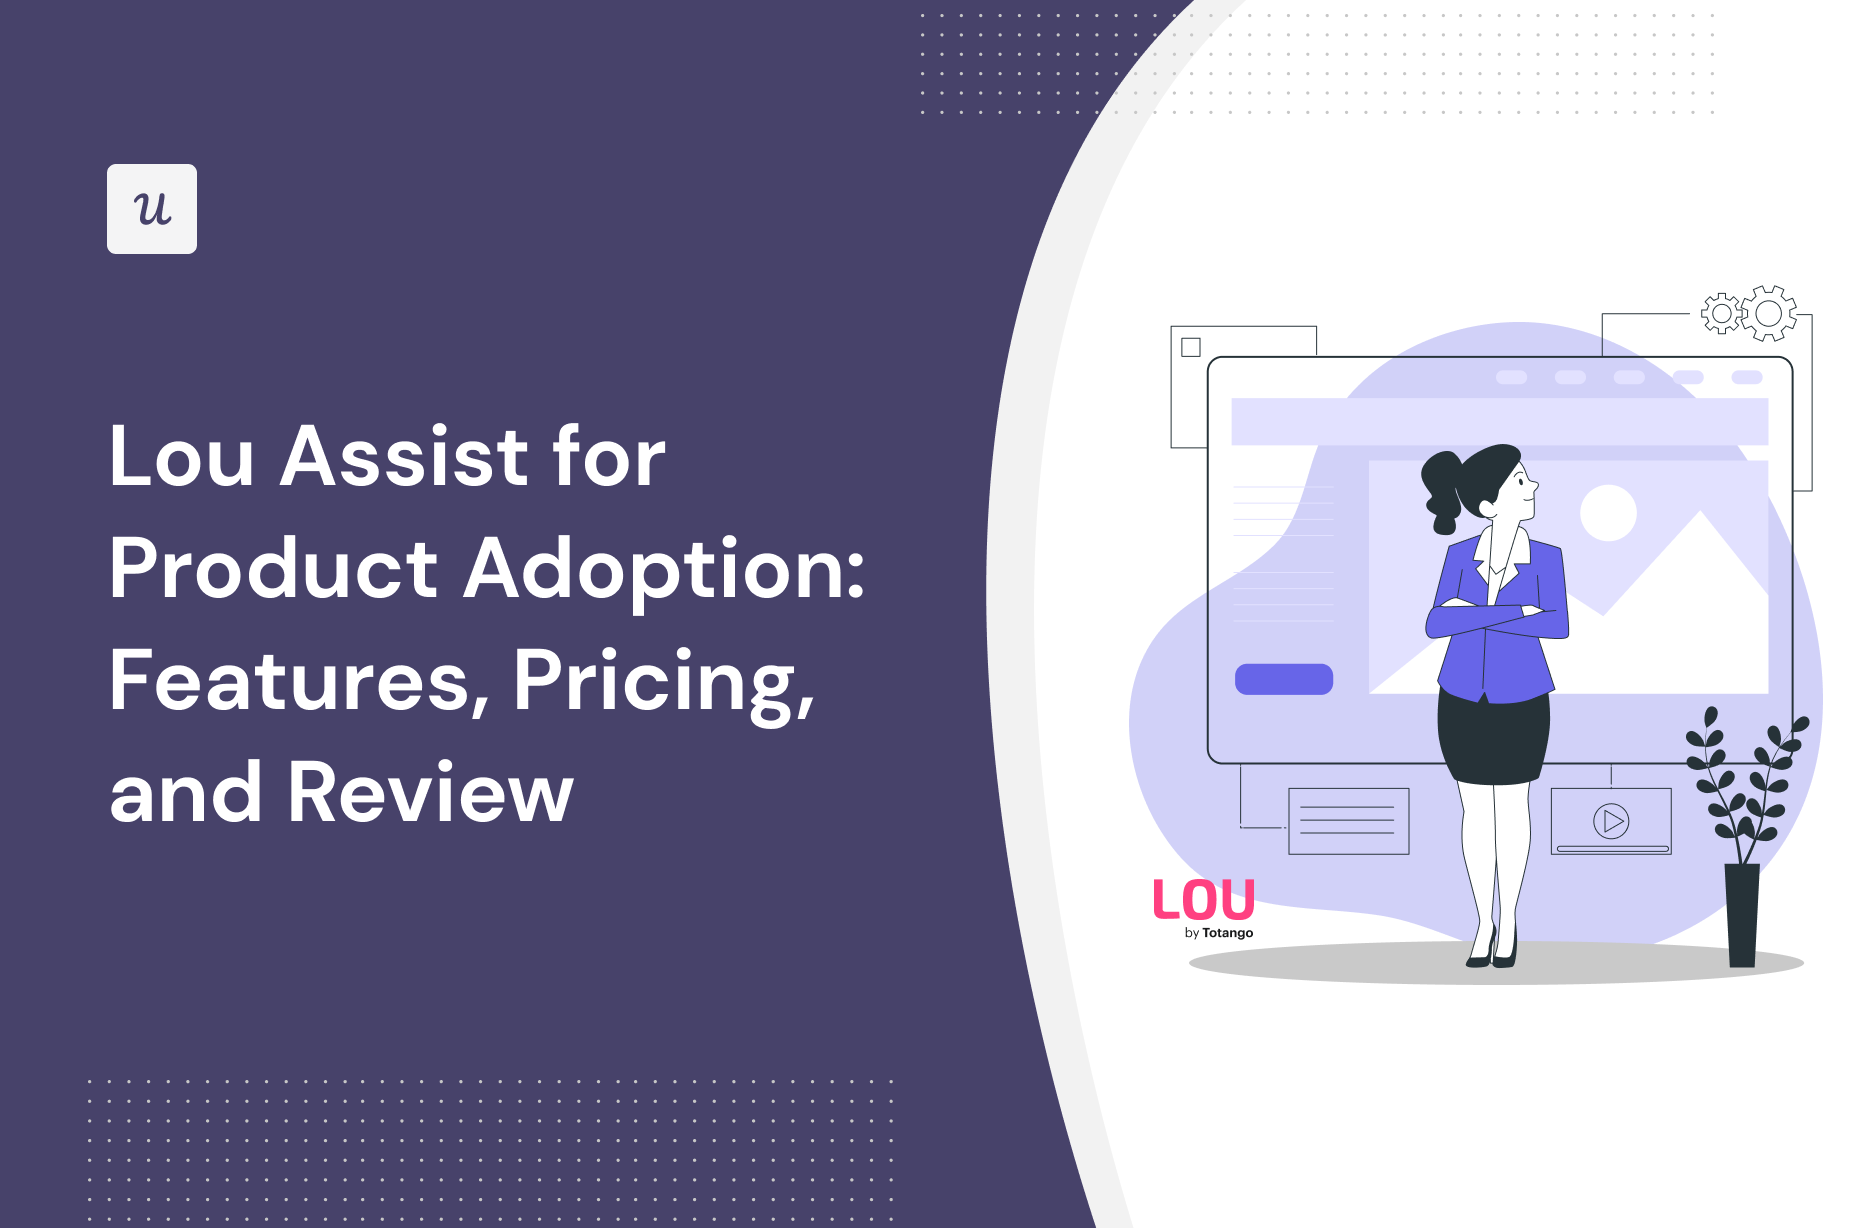 Lou Assist for Product Adoption: Features, Pricing, and Review